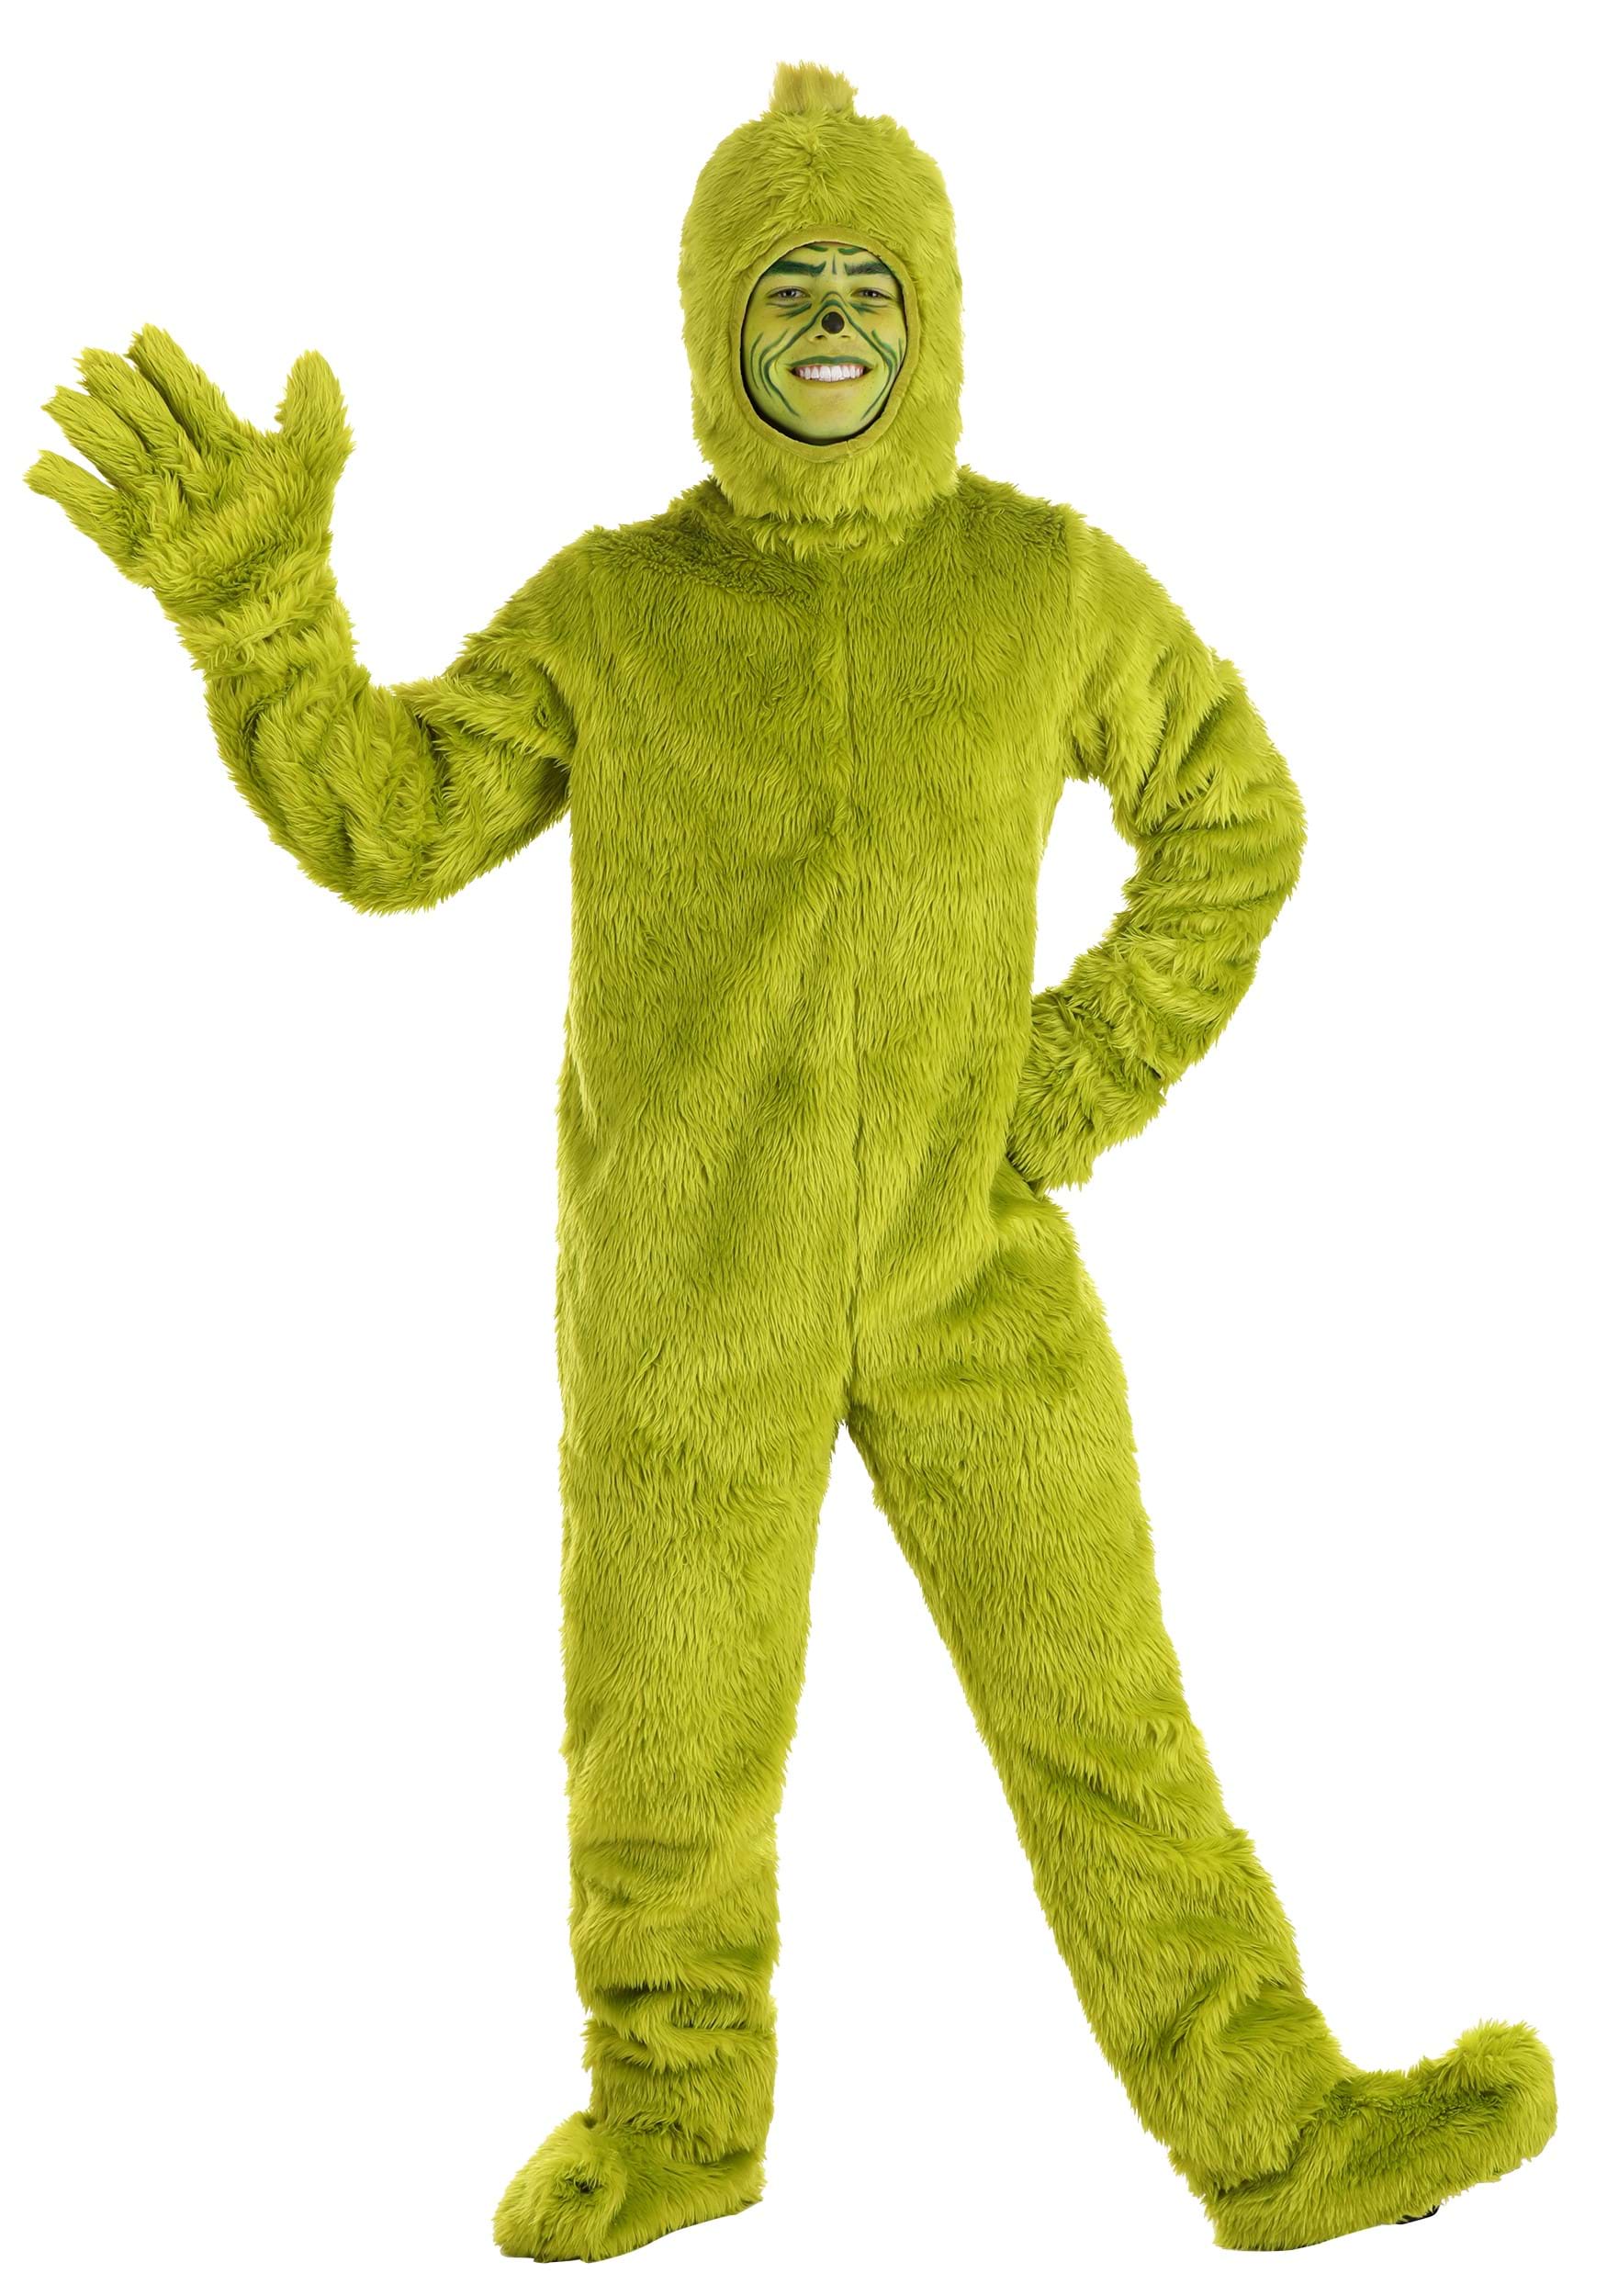 Dr. Seuss Open Face Grinch Costume , Adult Grinch Costumes